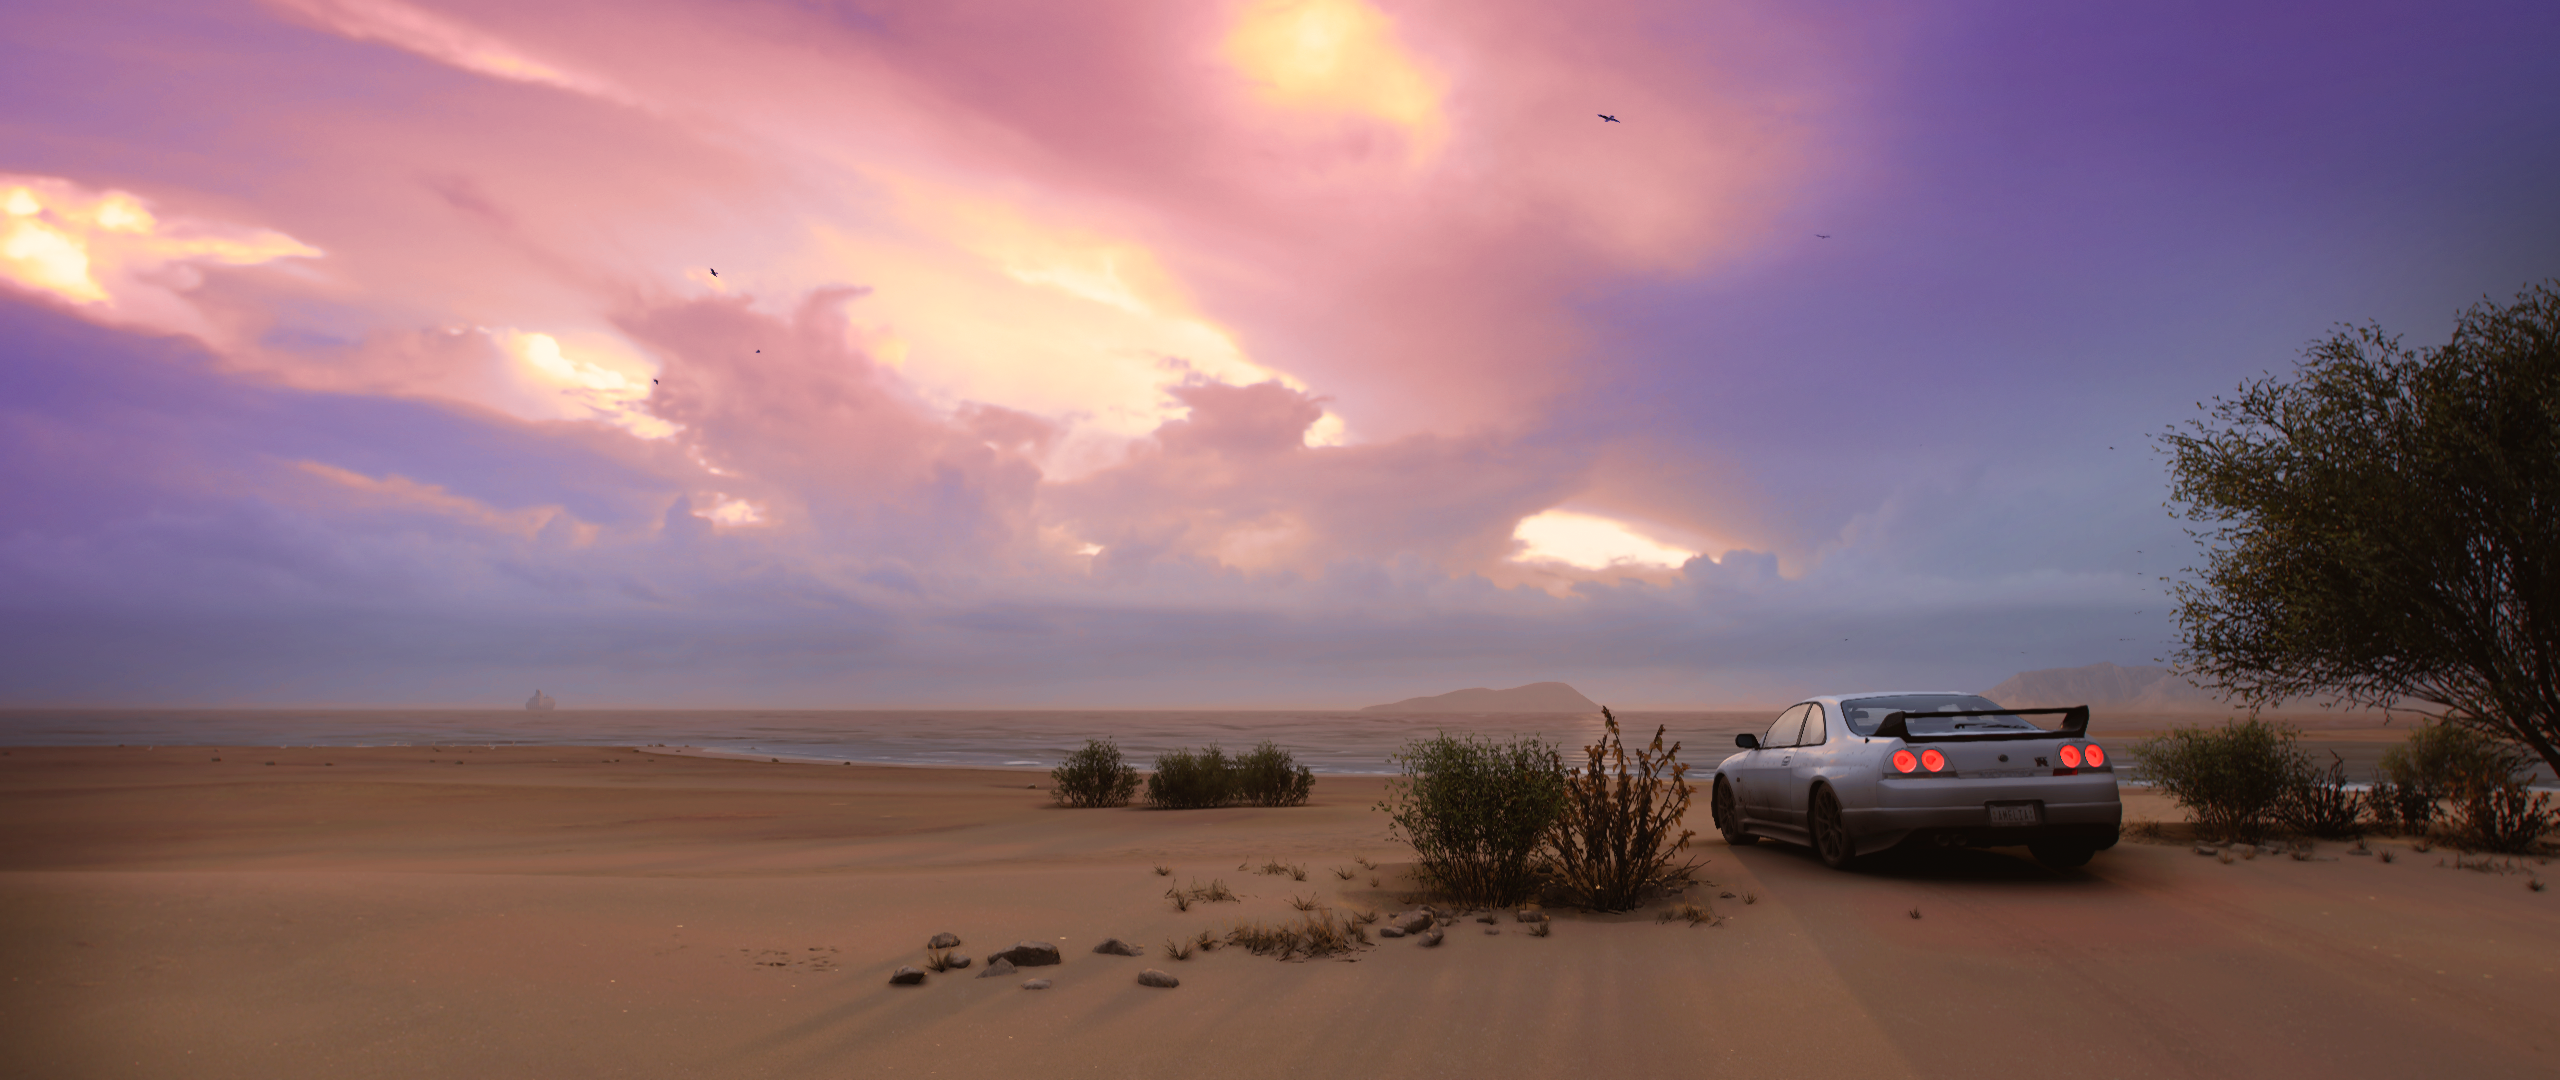 General 2560x1080 Forza Horizon 5 Nissan Skyline Nissan Skyline R32 racing landscape CGI video games sky clouds taillights rear view licence plates sunset sunset glow water car